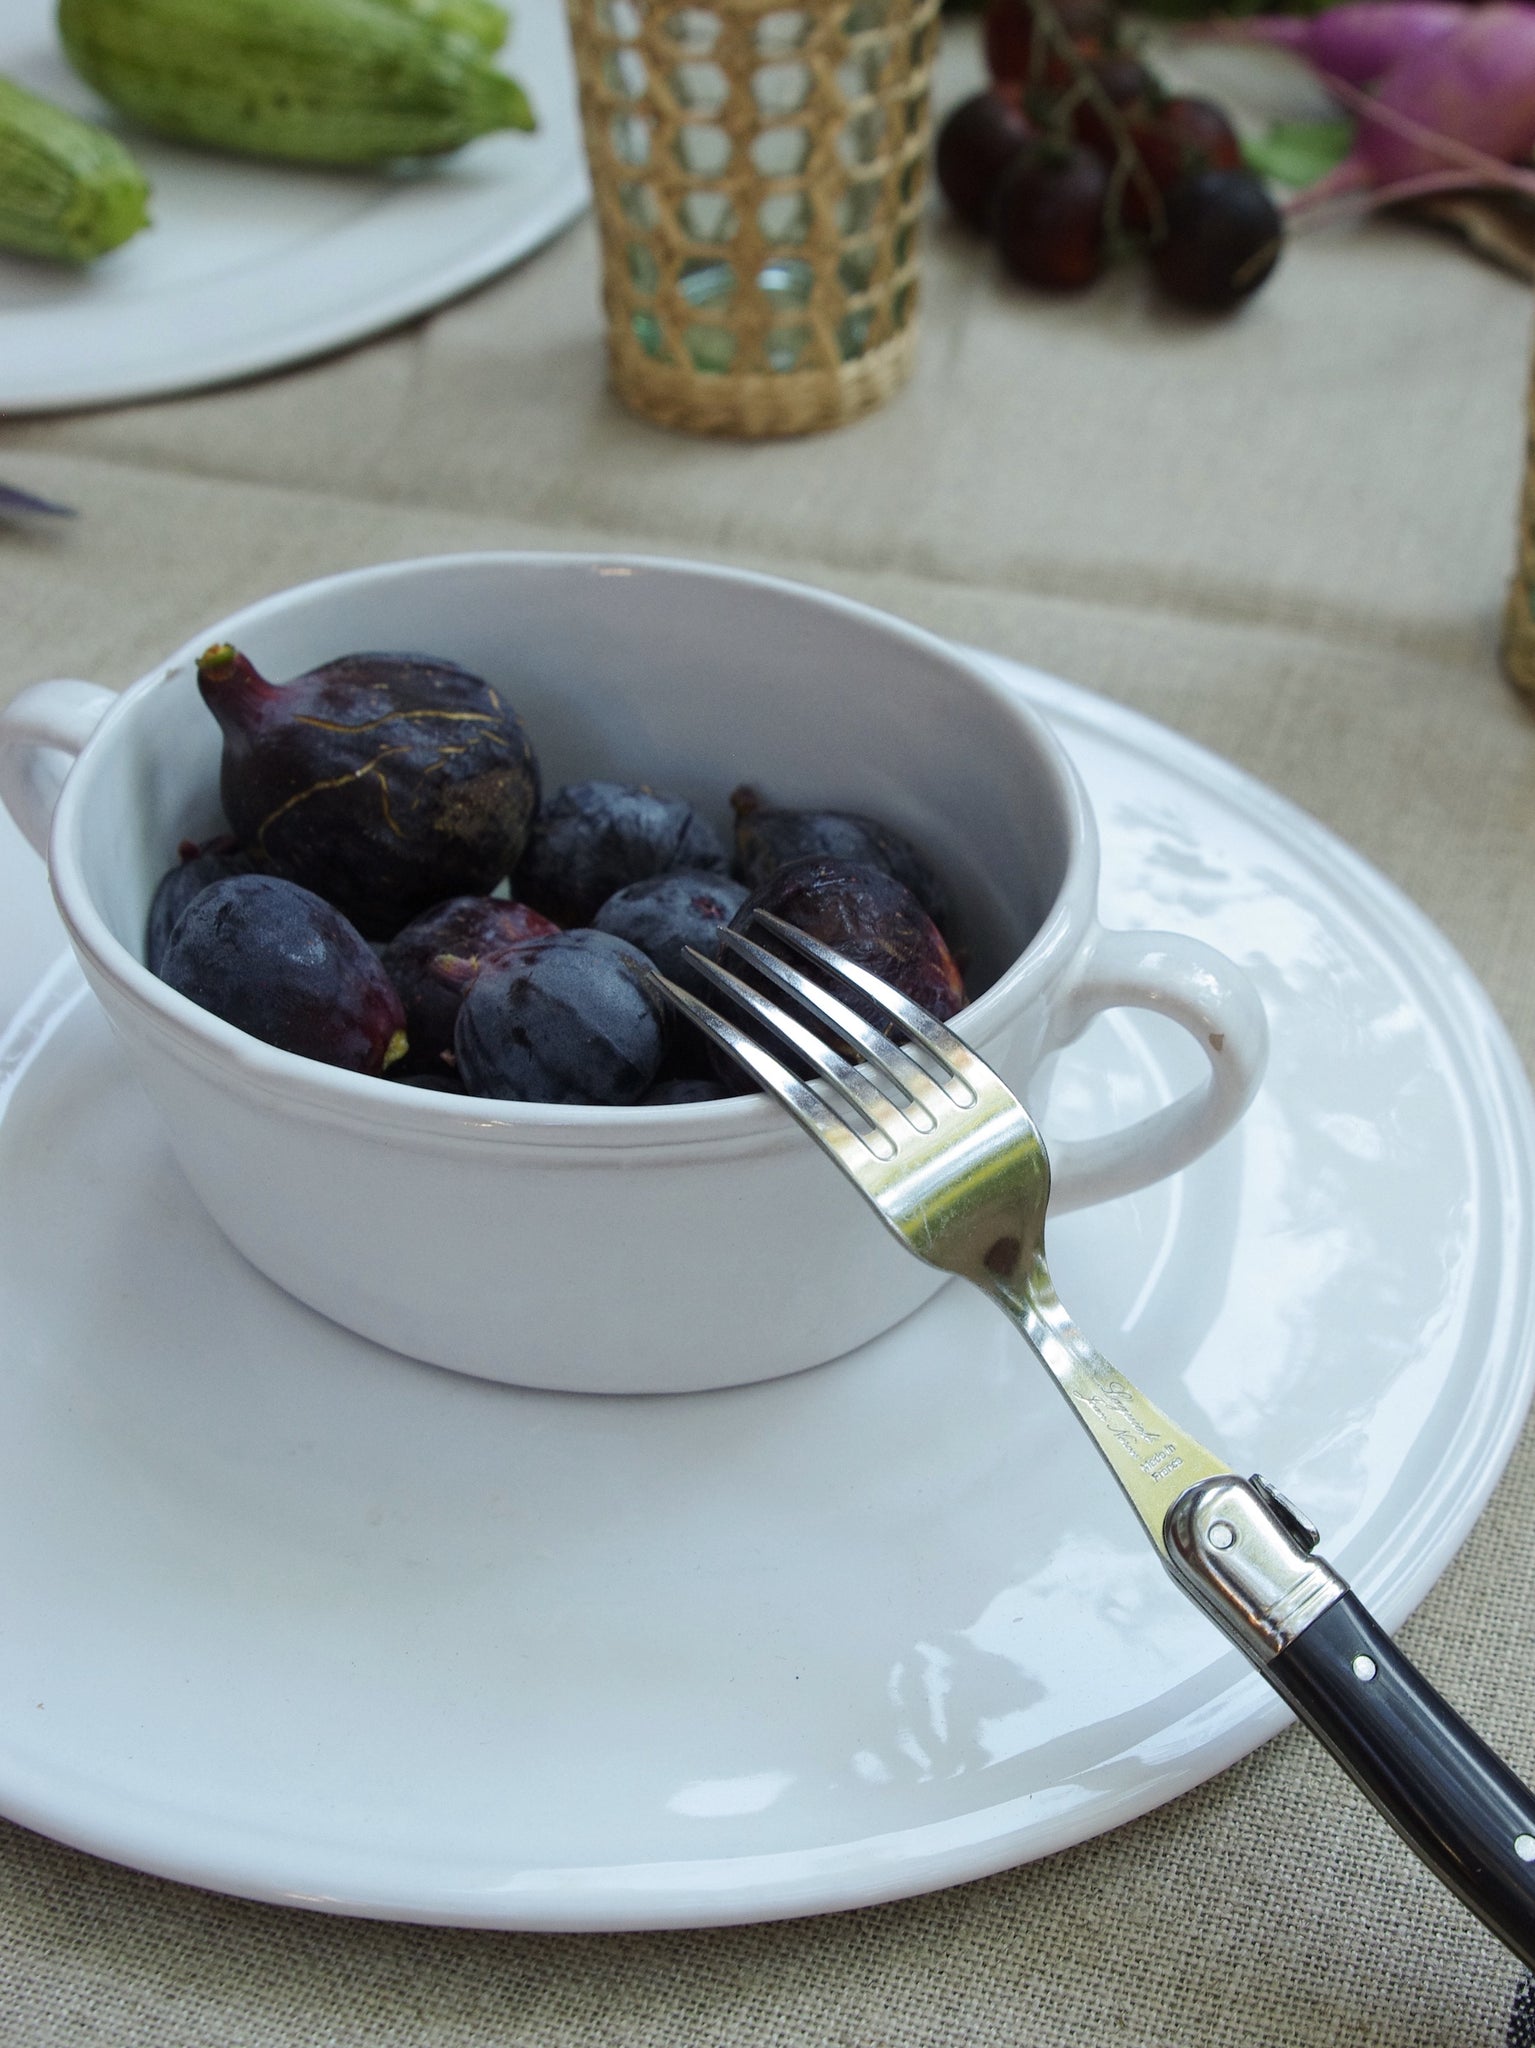 Bowl with two handles holding a bowl of figs next to a fork with a black handle.